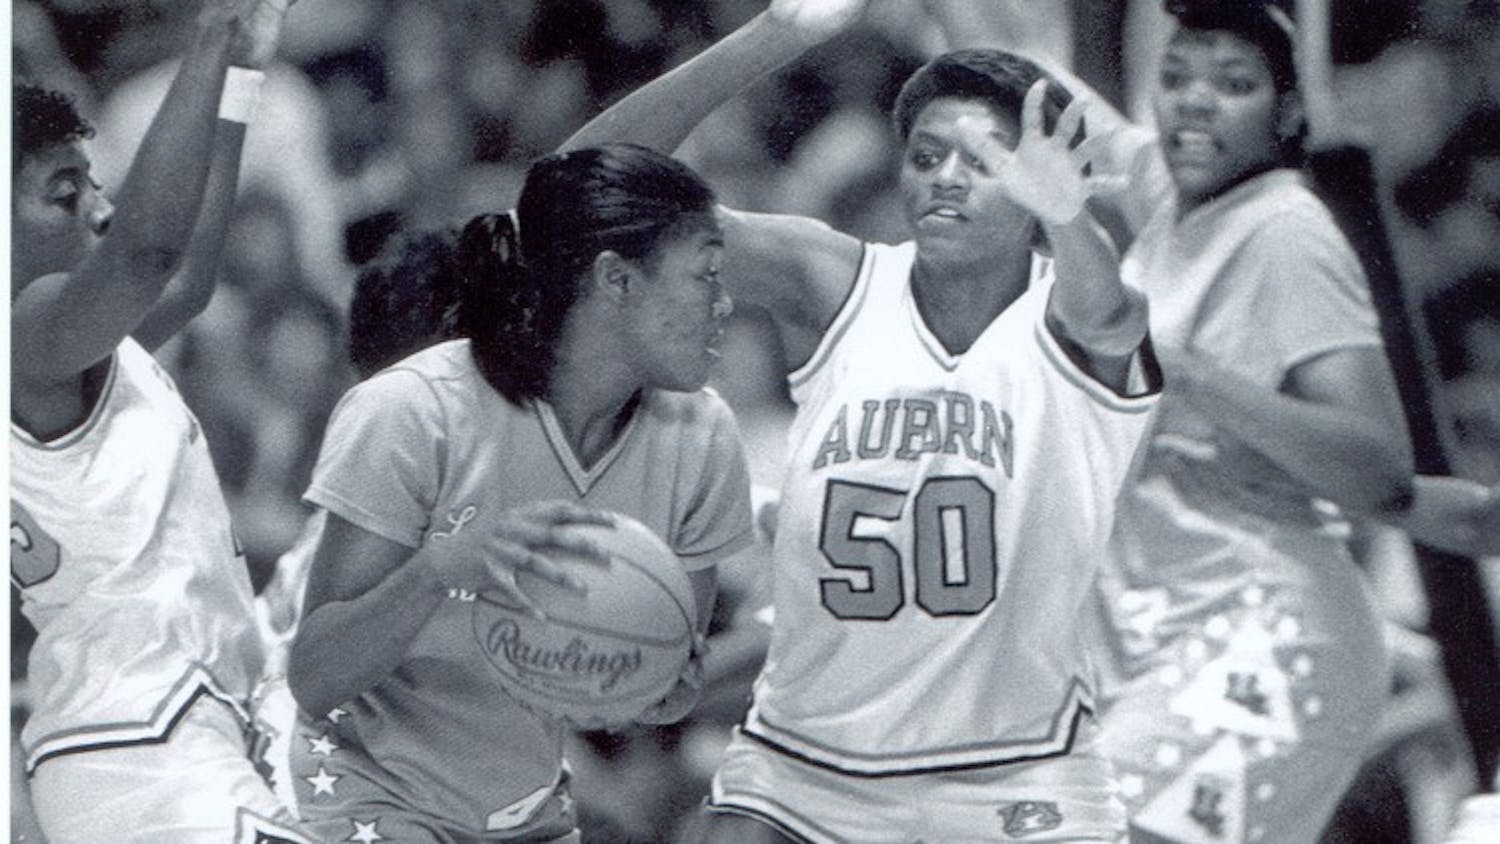 Vickie Orr (50) was a three-time All-American in the late 1980's at Auburn.